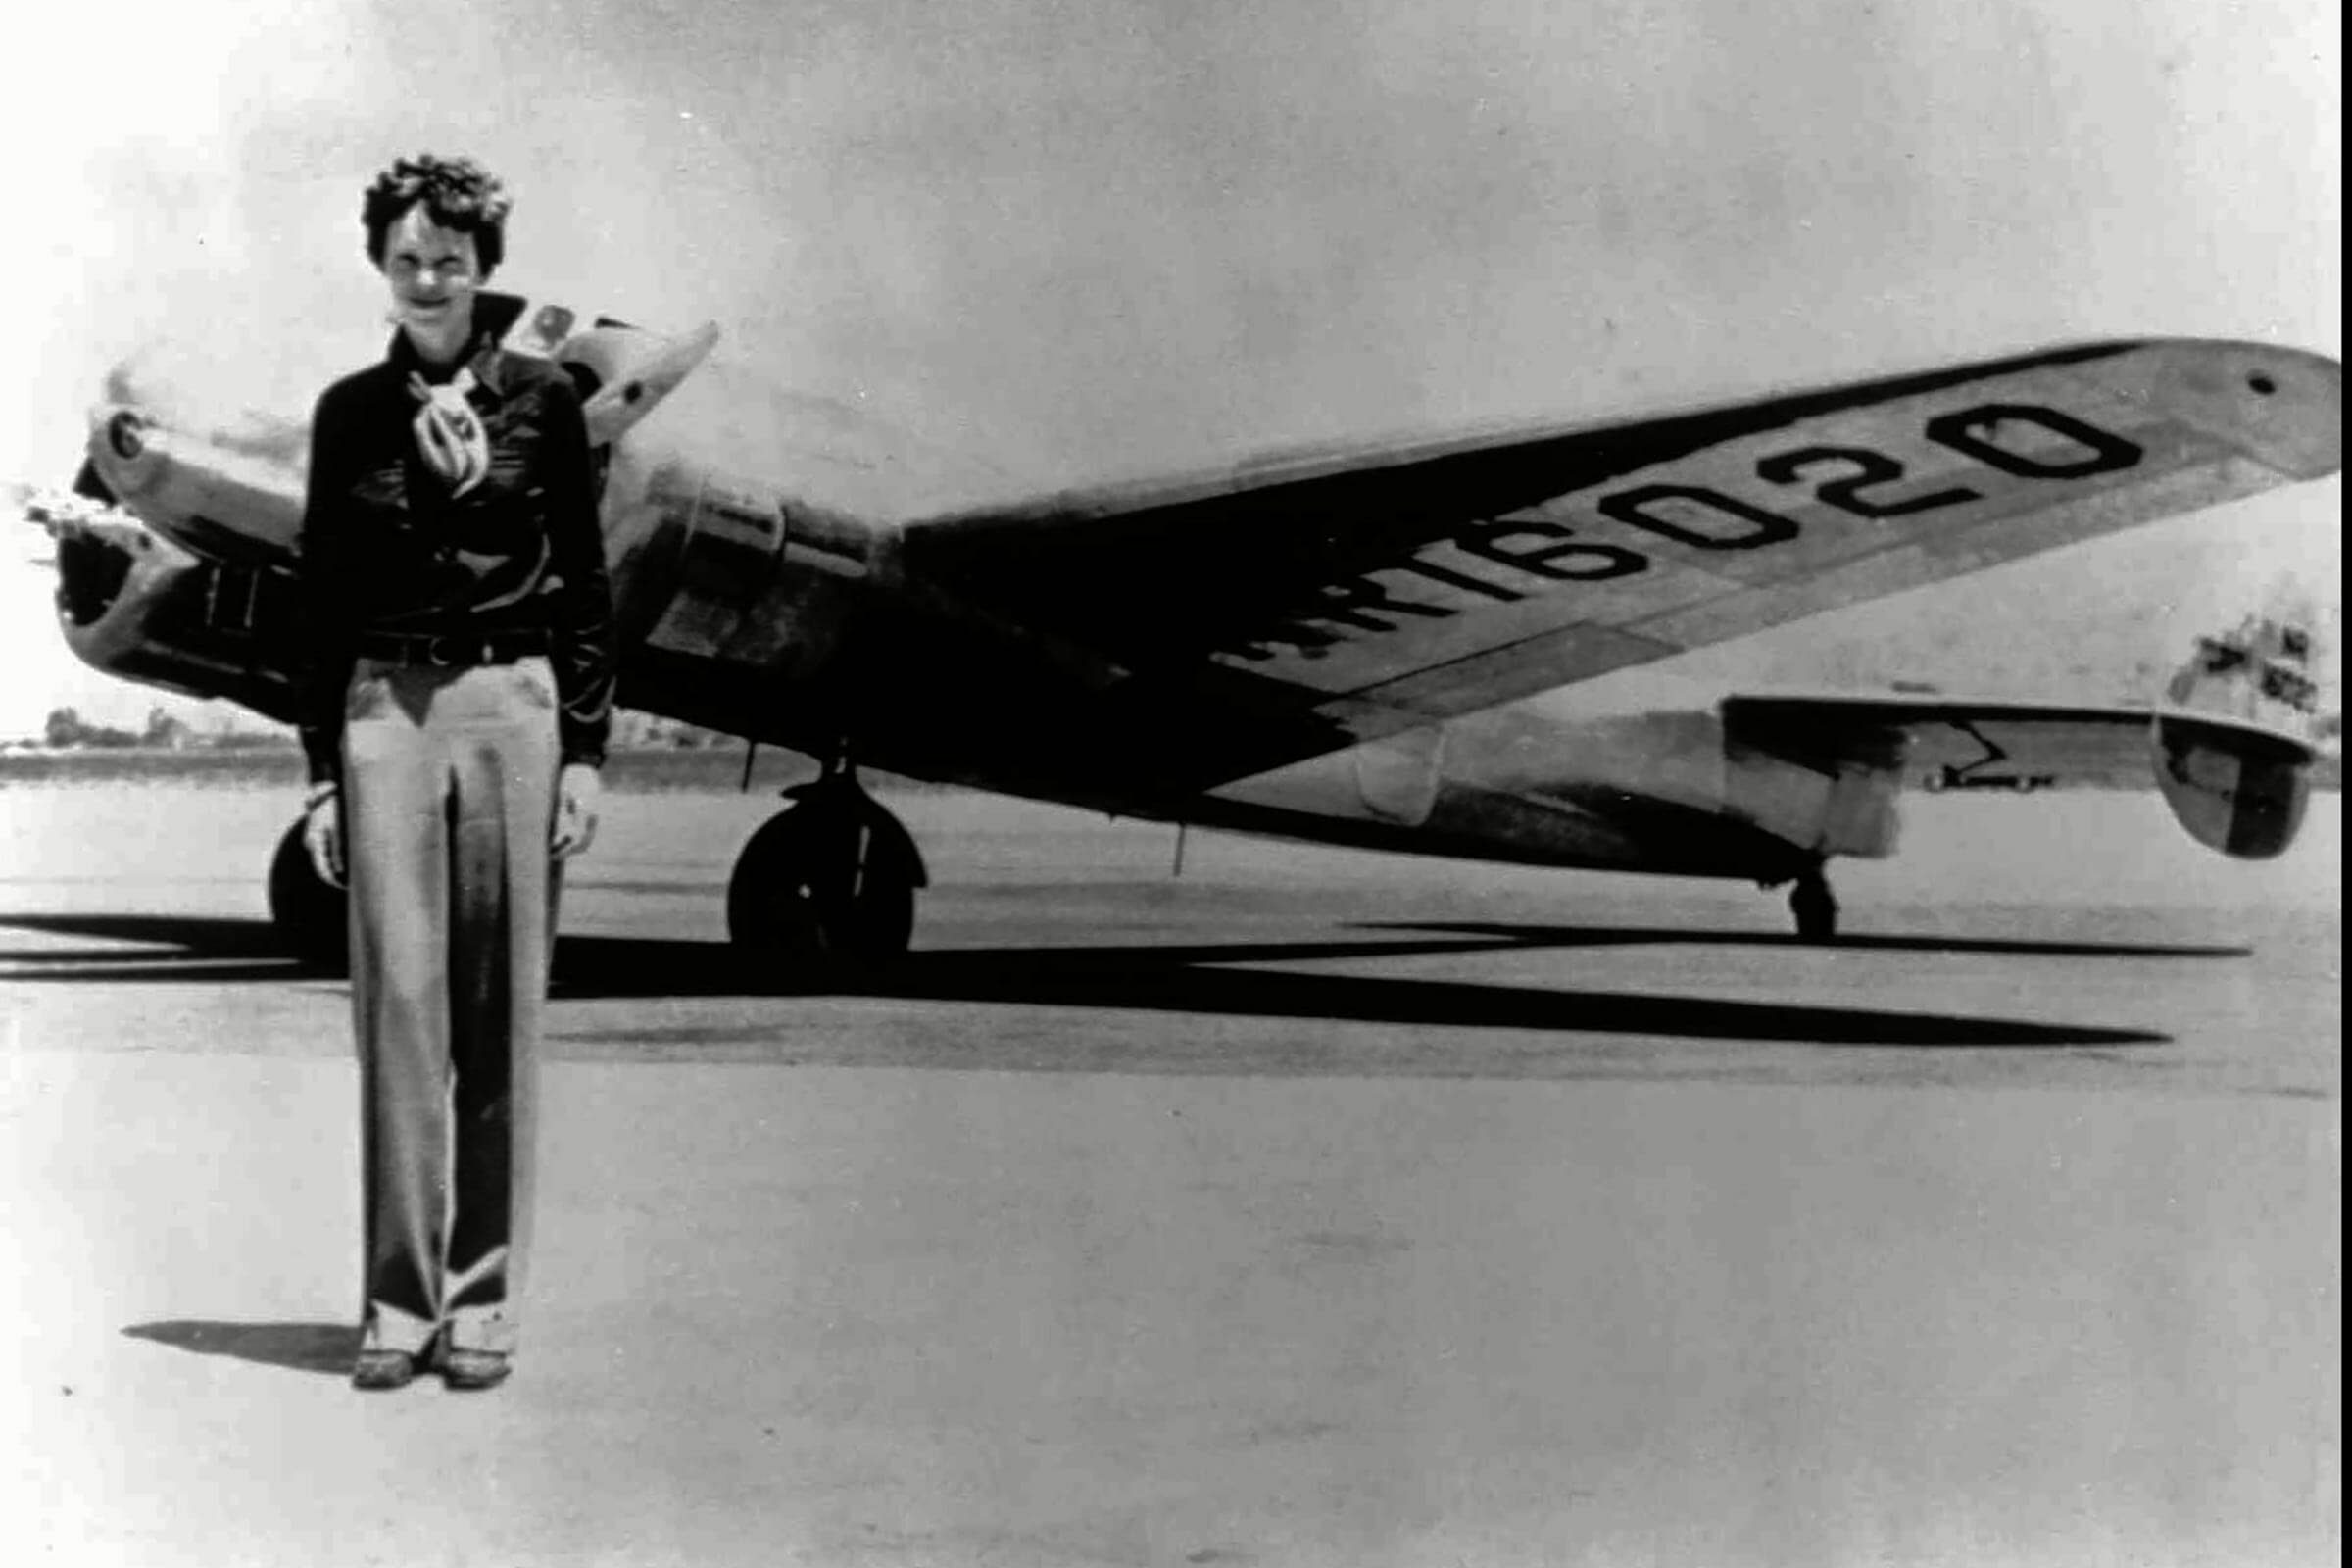 EARHART Amelia Earhart, 40, stands next to a Lockheed Electra 10E, before her last flight in 1937 from Oakland, Calif., bound for Honolulu on the first leg of her record-setting attempt to circumnavigate the world westward along the Equator